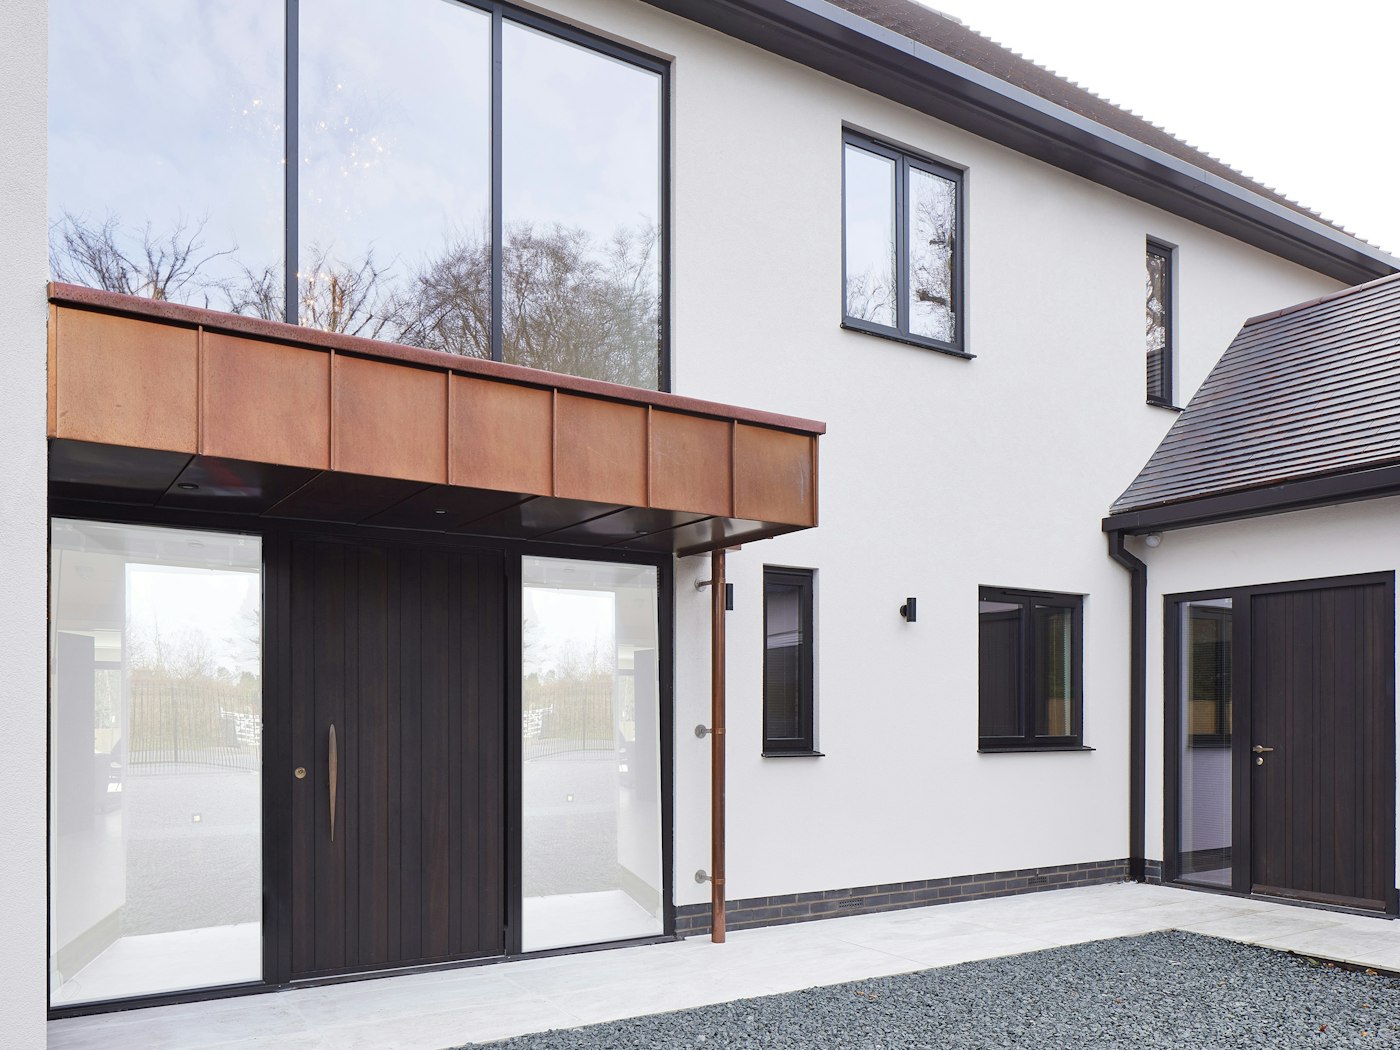   The house features two of our E80 doorsets one as a pivot and one as a side door in a hinged version